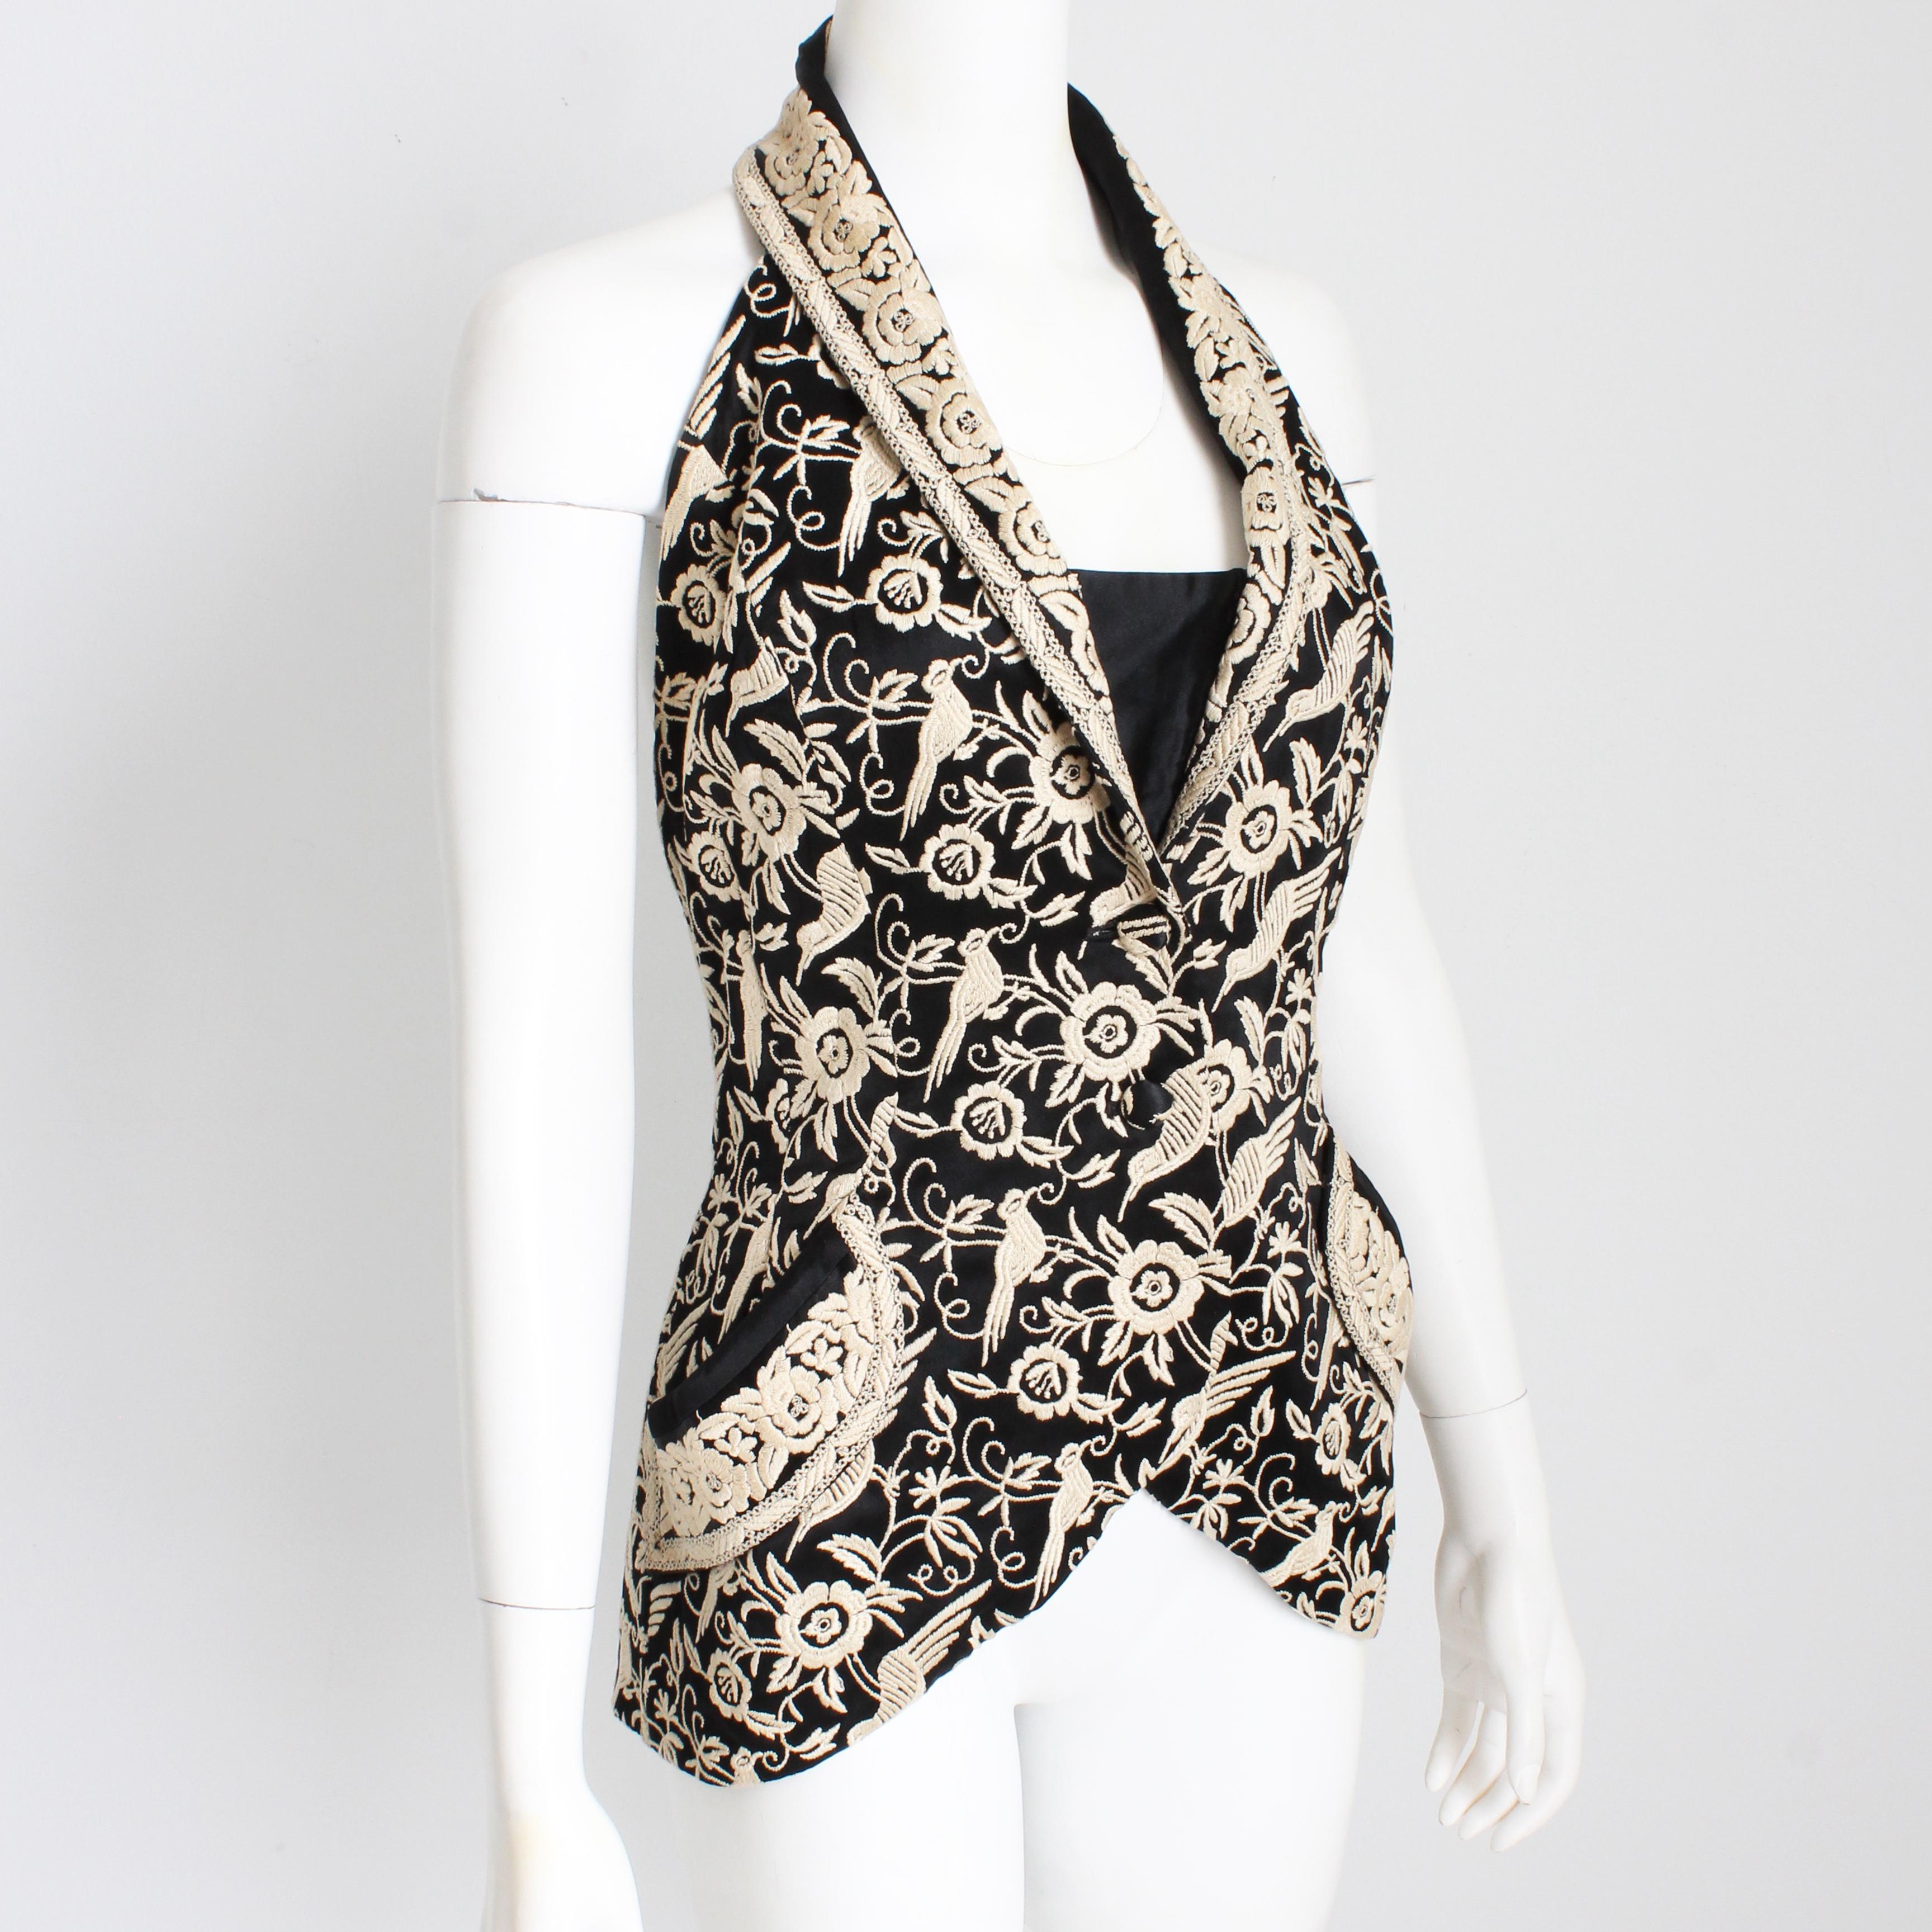 Preowned, vintage Norma Kamali OMO halter top, sold by high end boutique Fred Hayman Beverly Hills and likely made in the early 90s.  Made from black fabric, it features gorgeous cream-colored embroidery of scrolling flowers and birds throughout. 